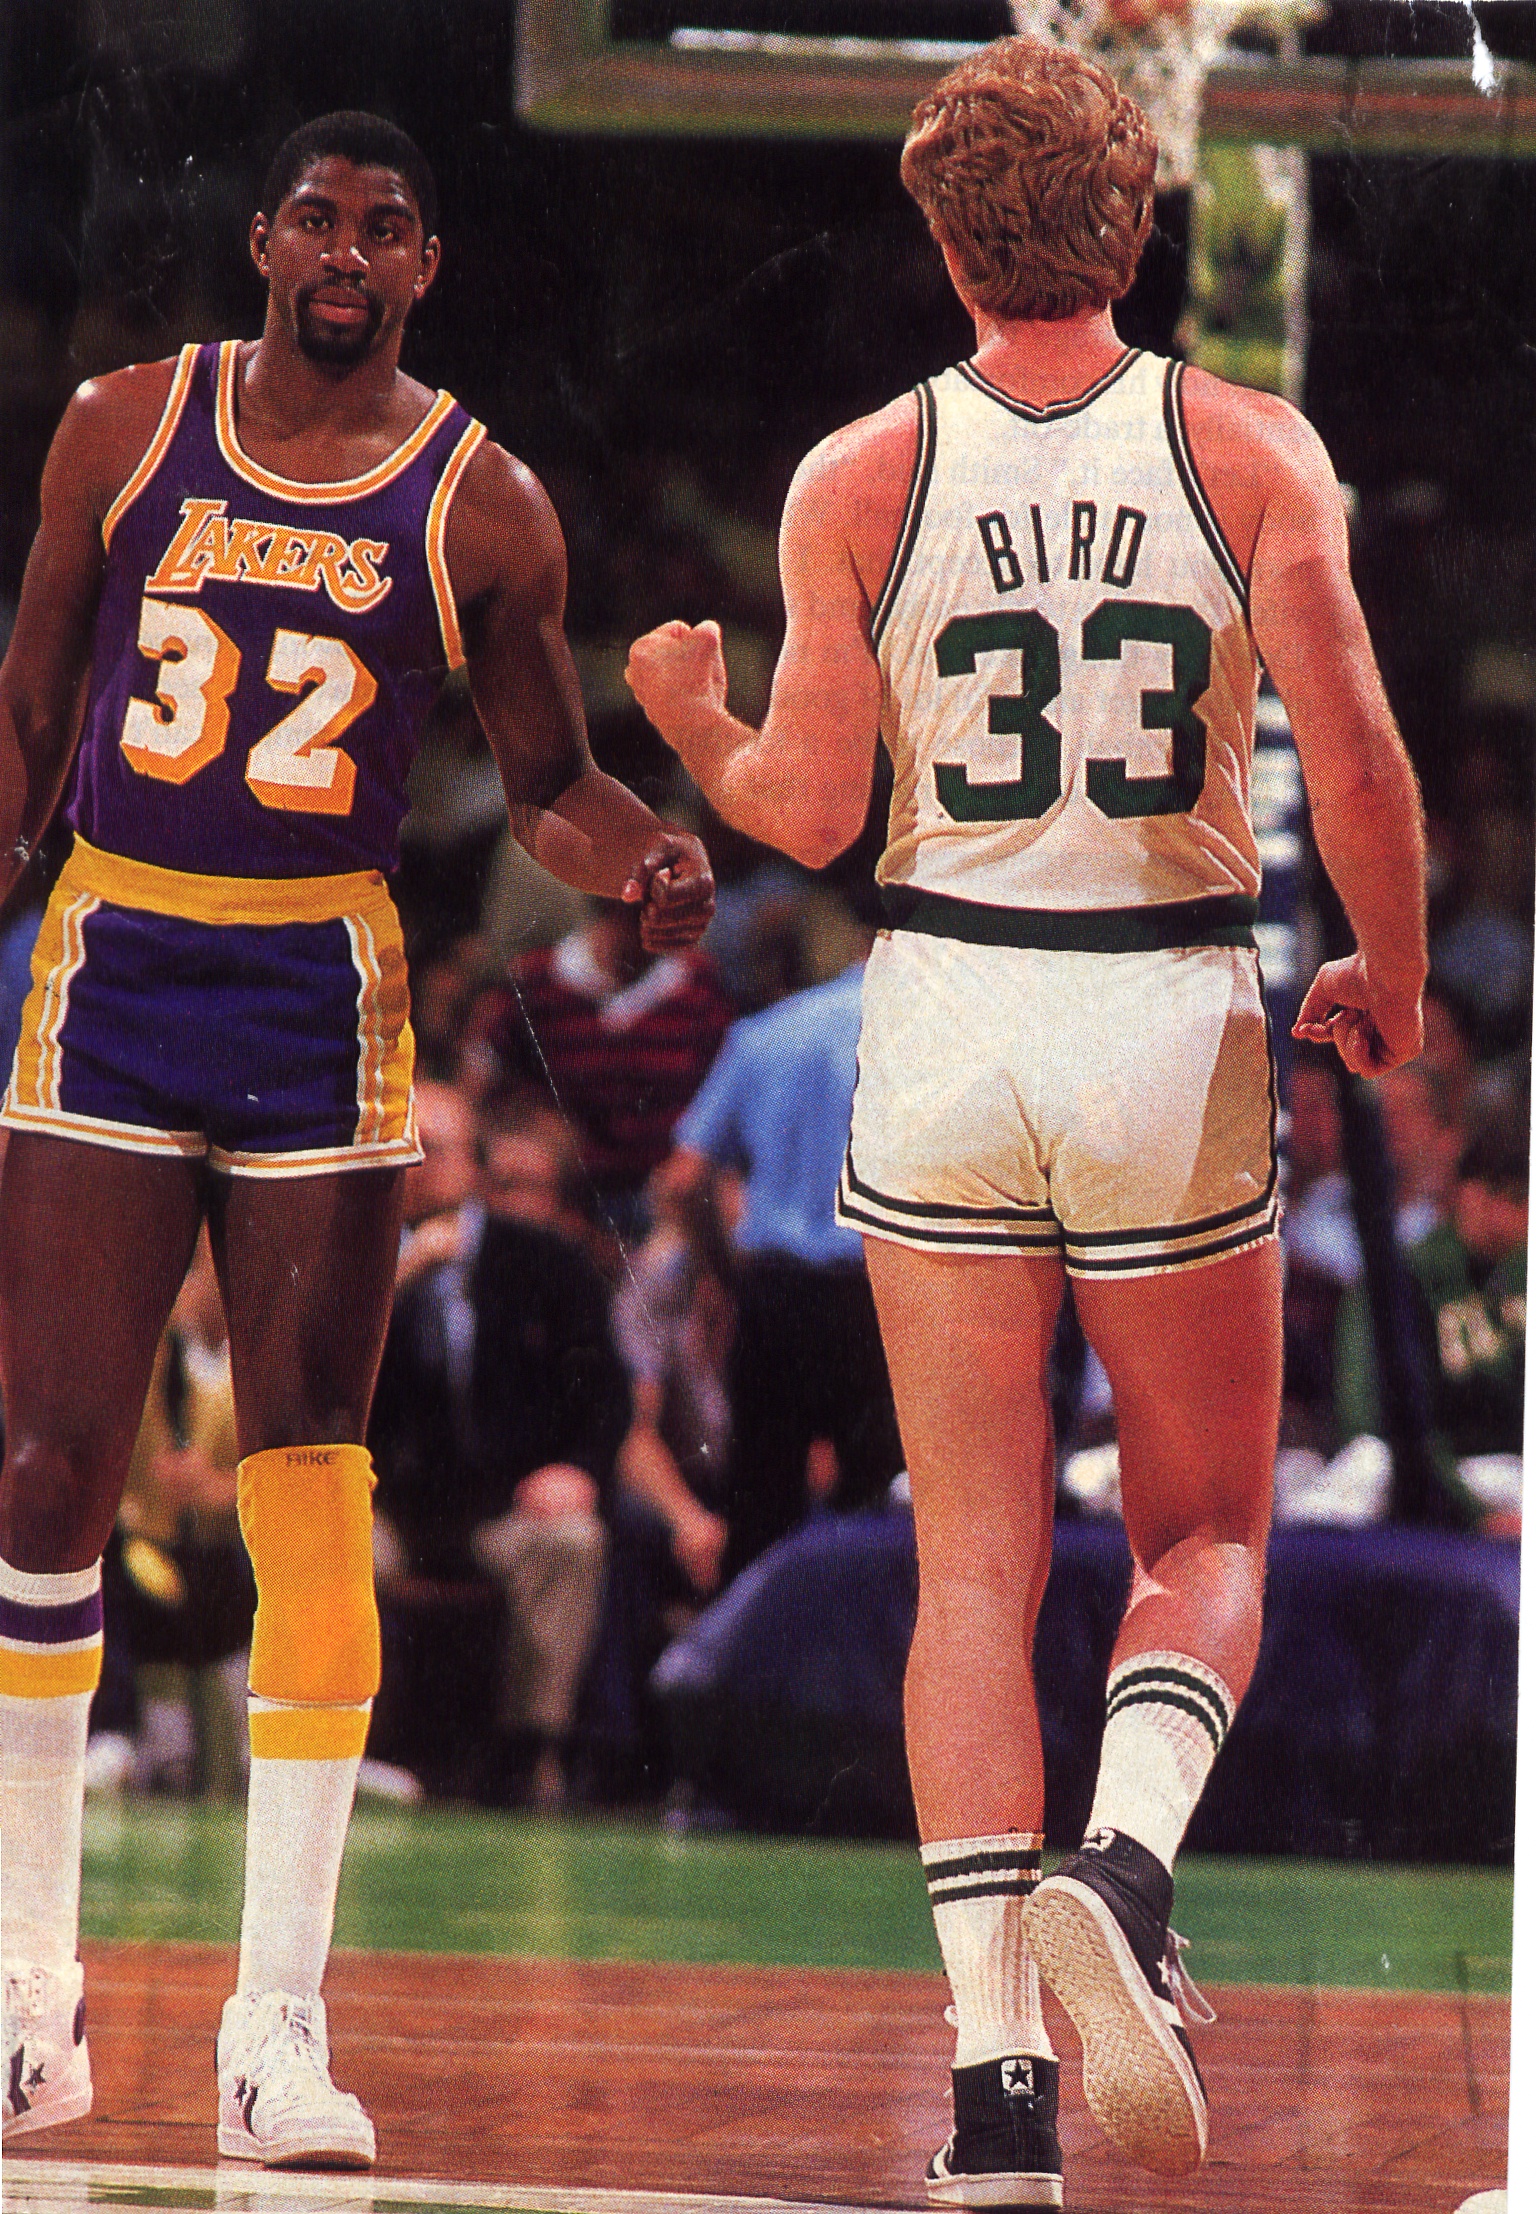 Respectful rivalries… and really short shorts. Larry Bird